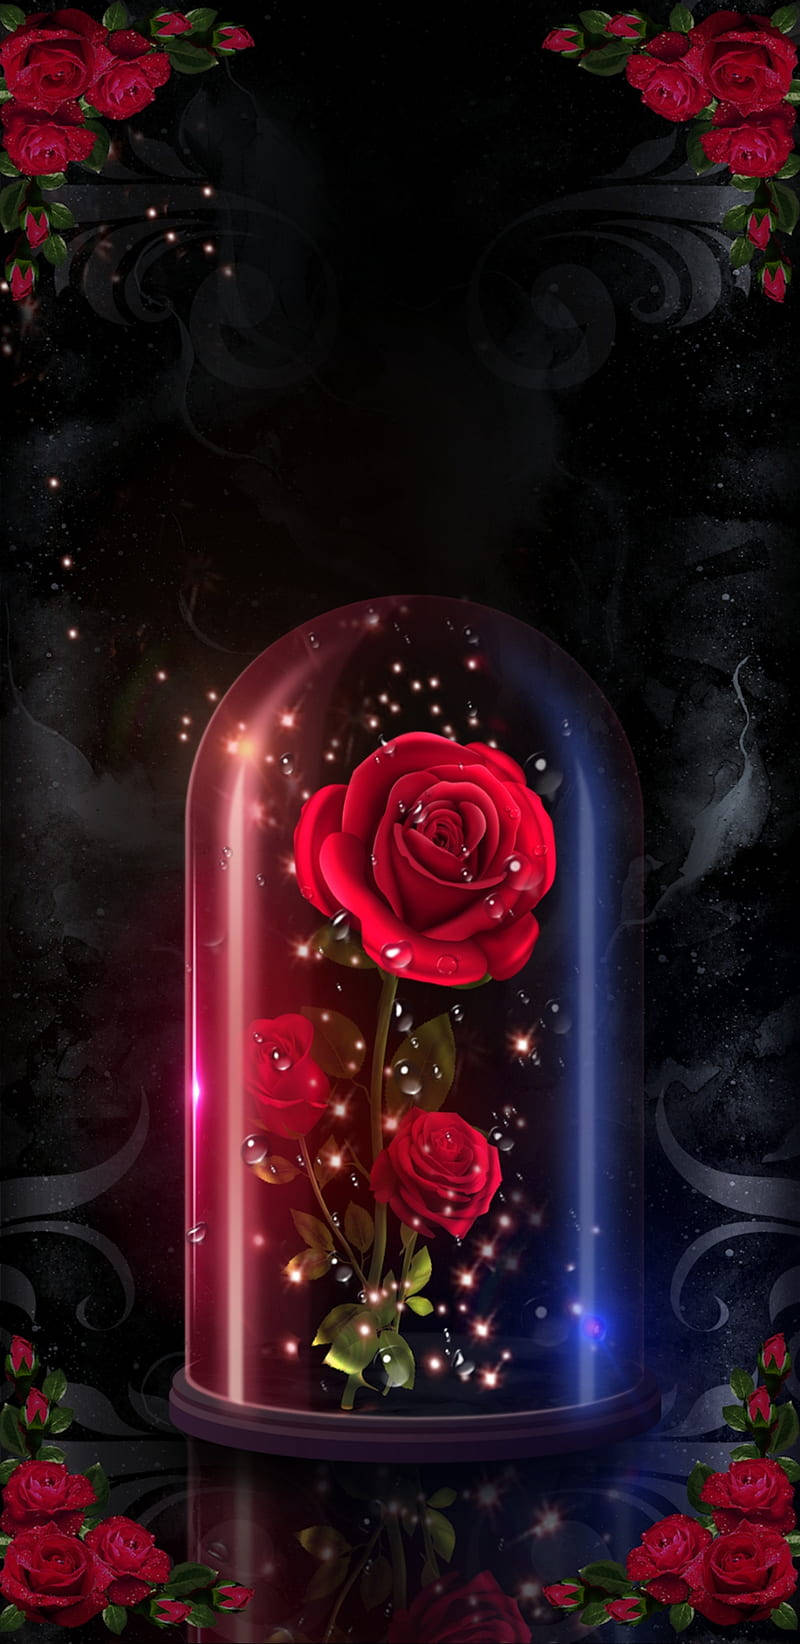 Download Romantic Rose Inside Glass Container Wallpaper 